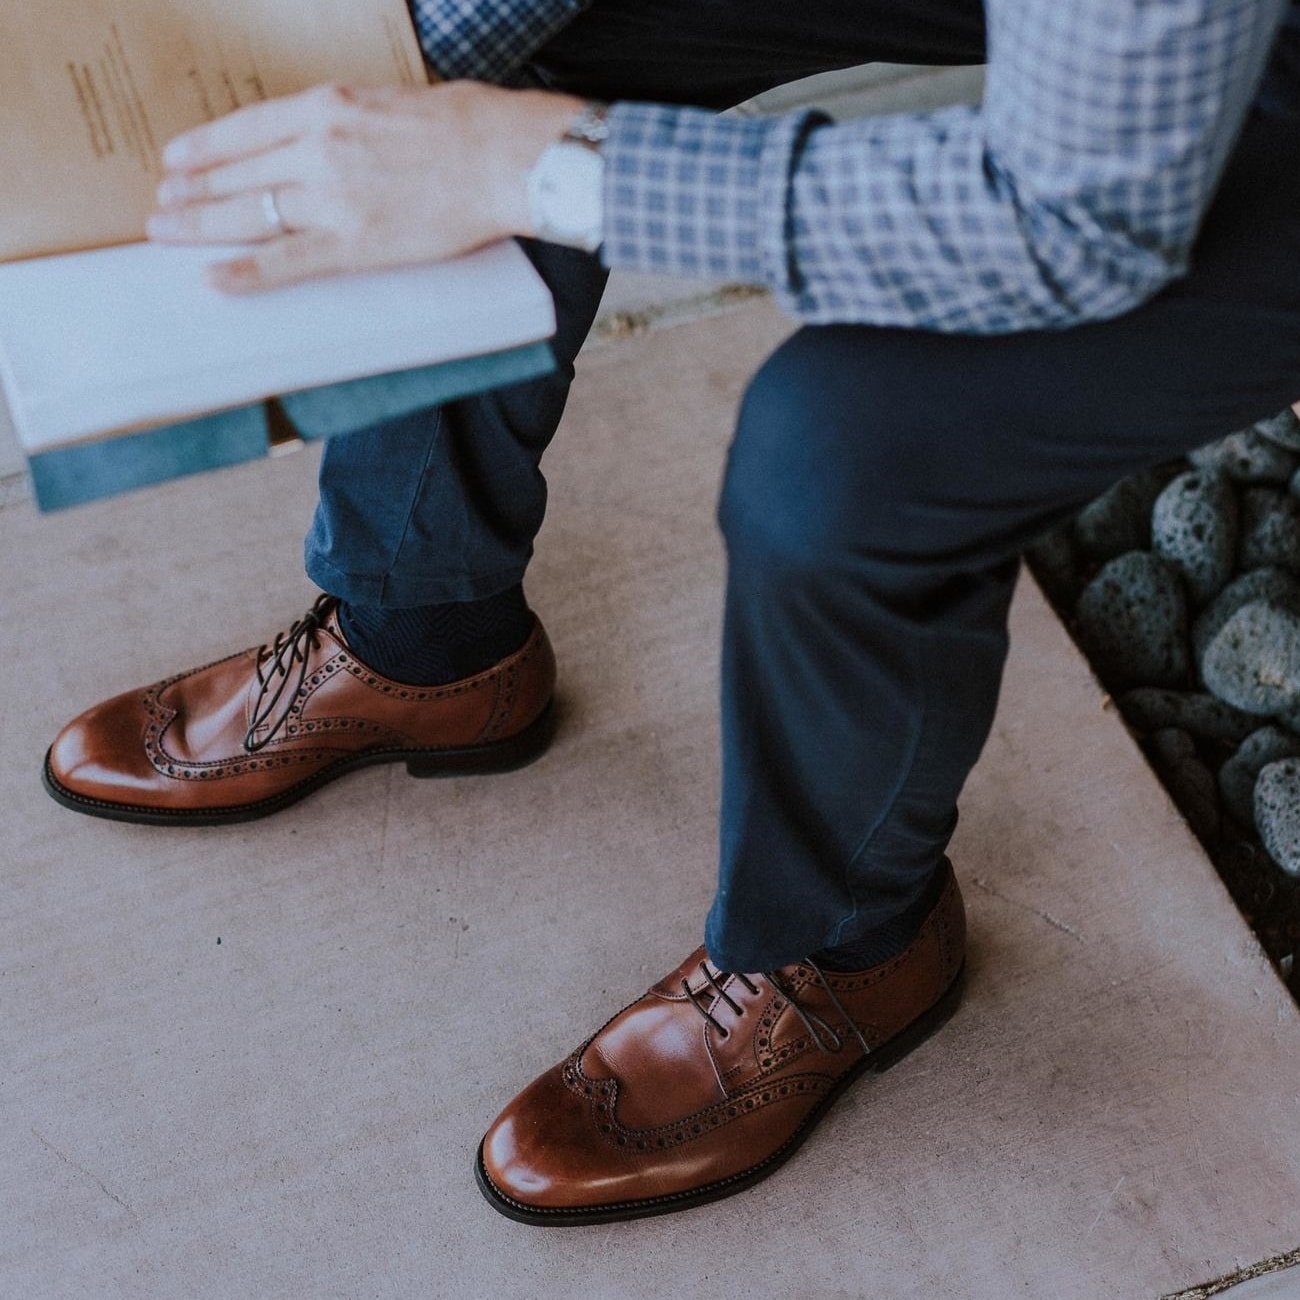 Business Casual Shoes for Men: The 8 Best Options to Step Out in Style -  The Modest Man